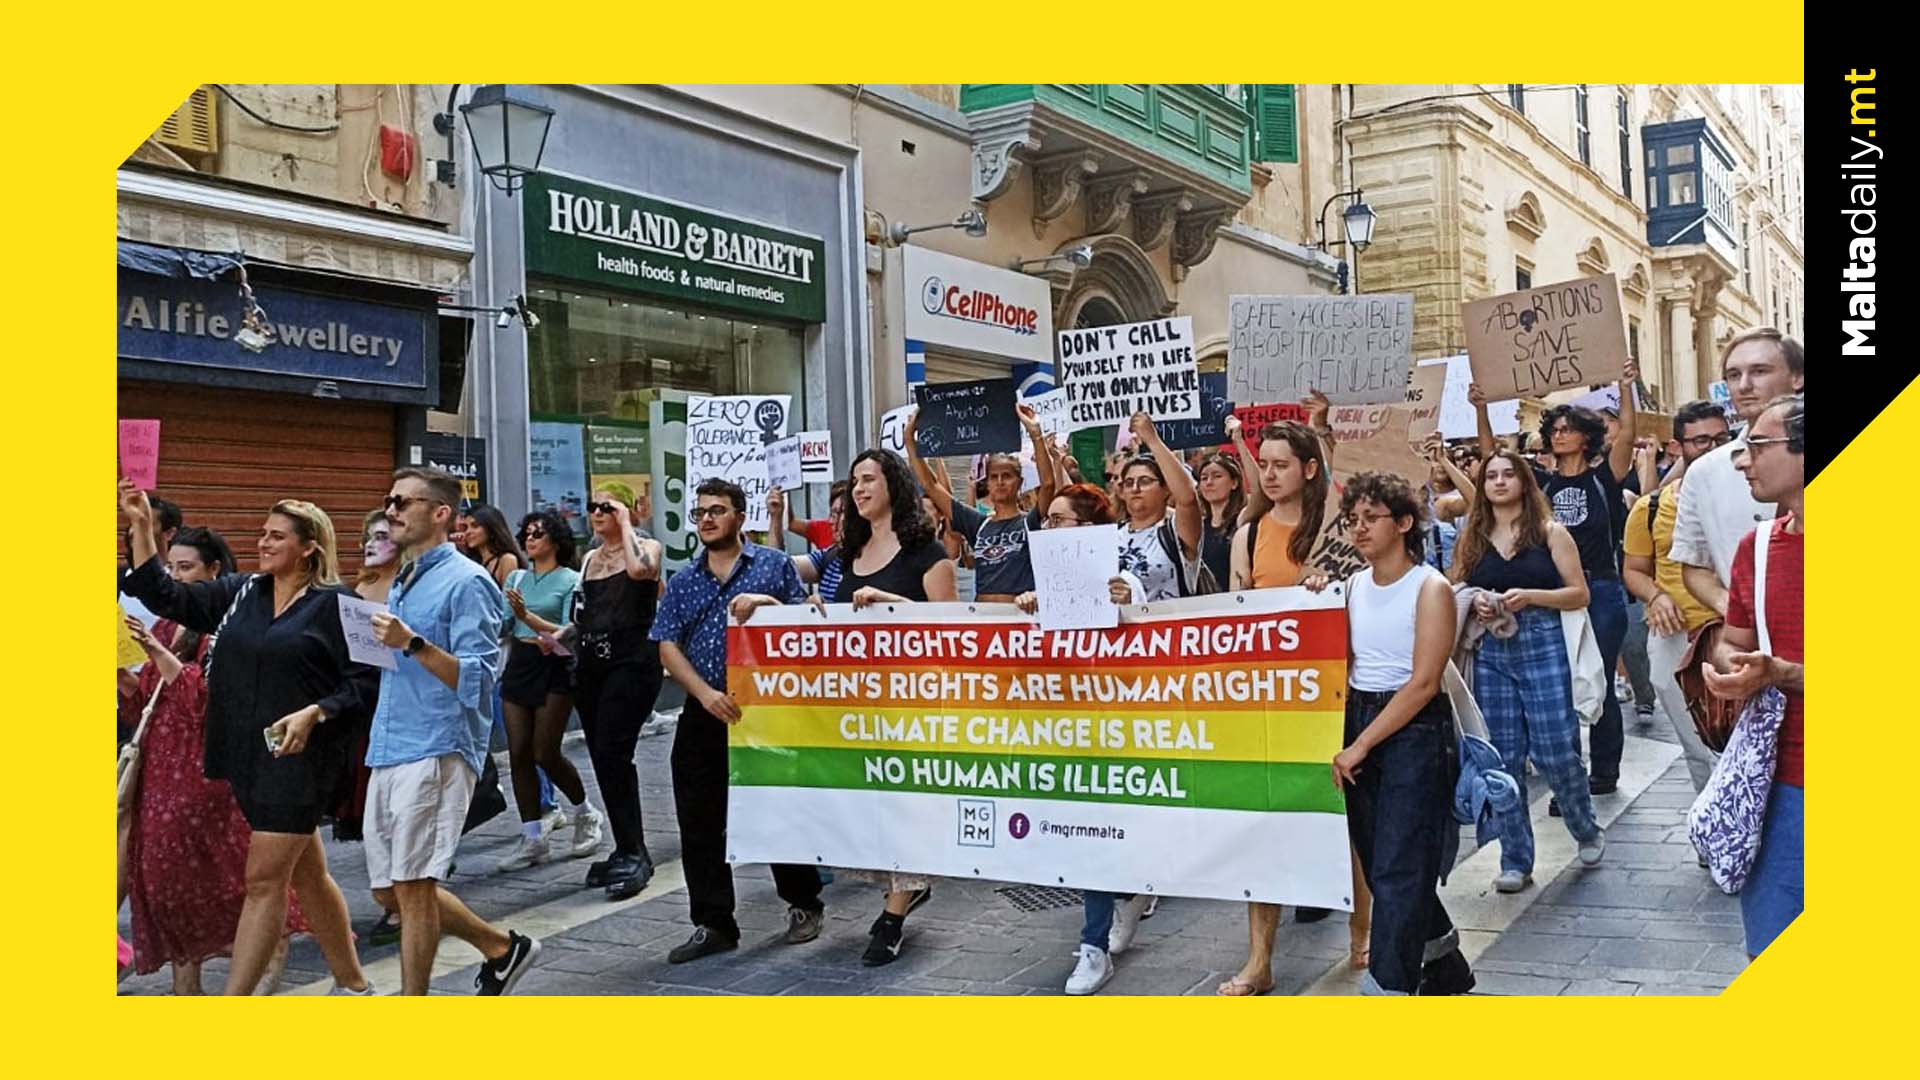 Malta LGBTIQ Rights Movement becomes a member of the Voice for Choice coalition